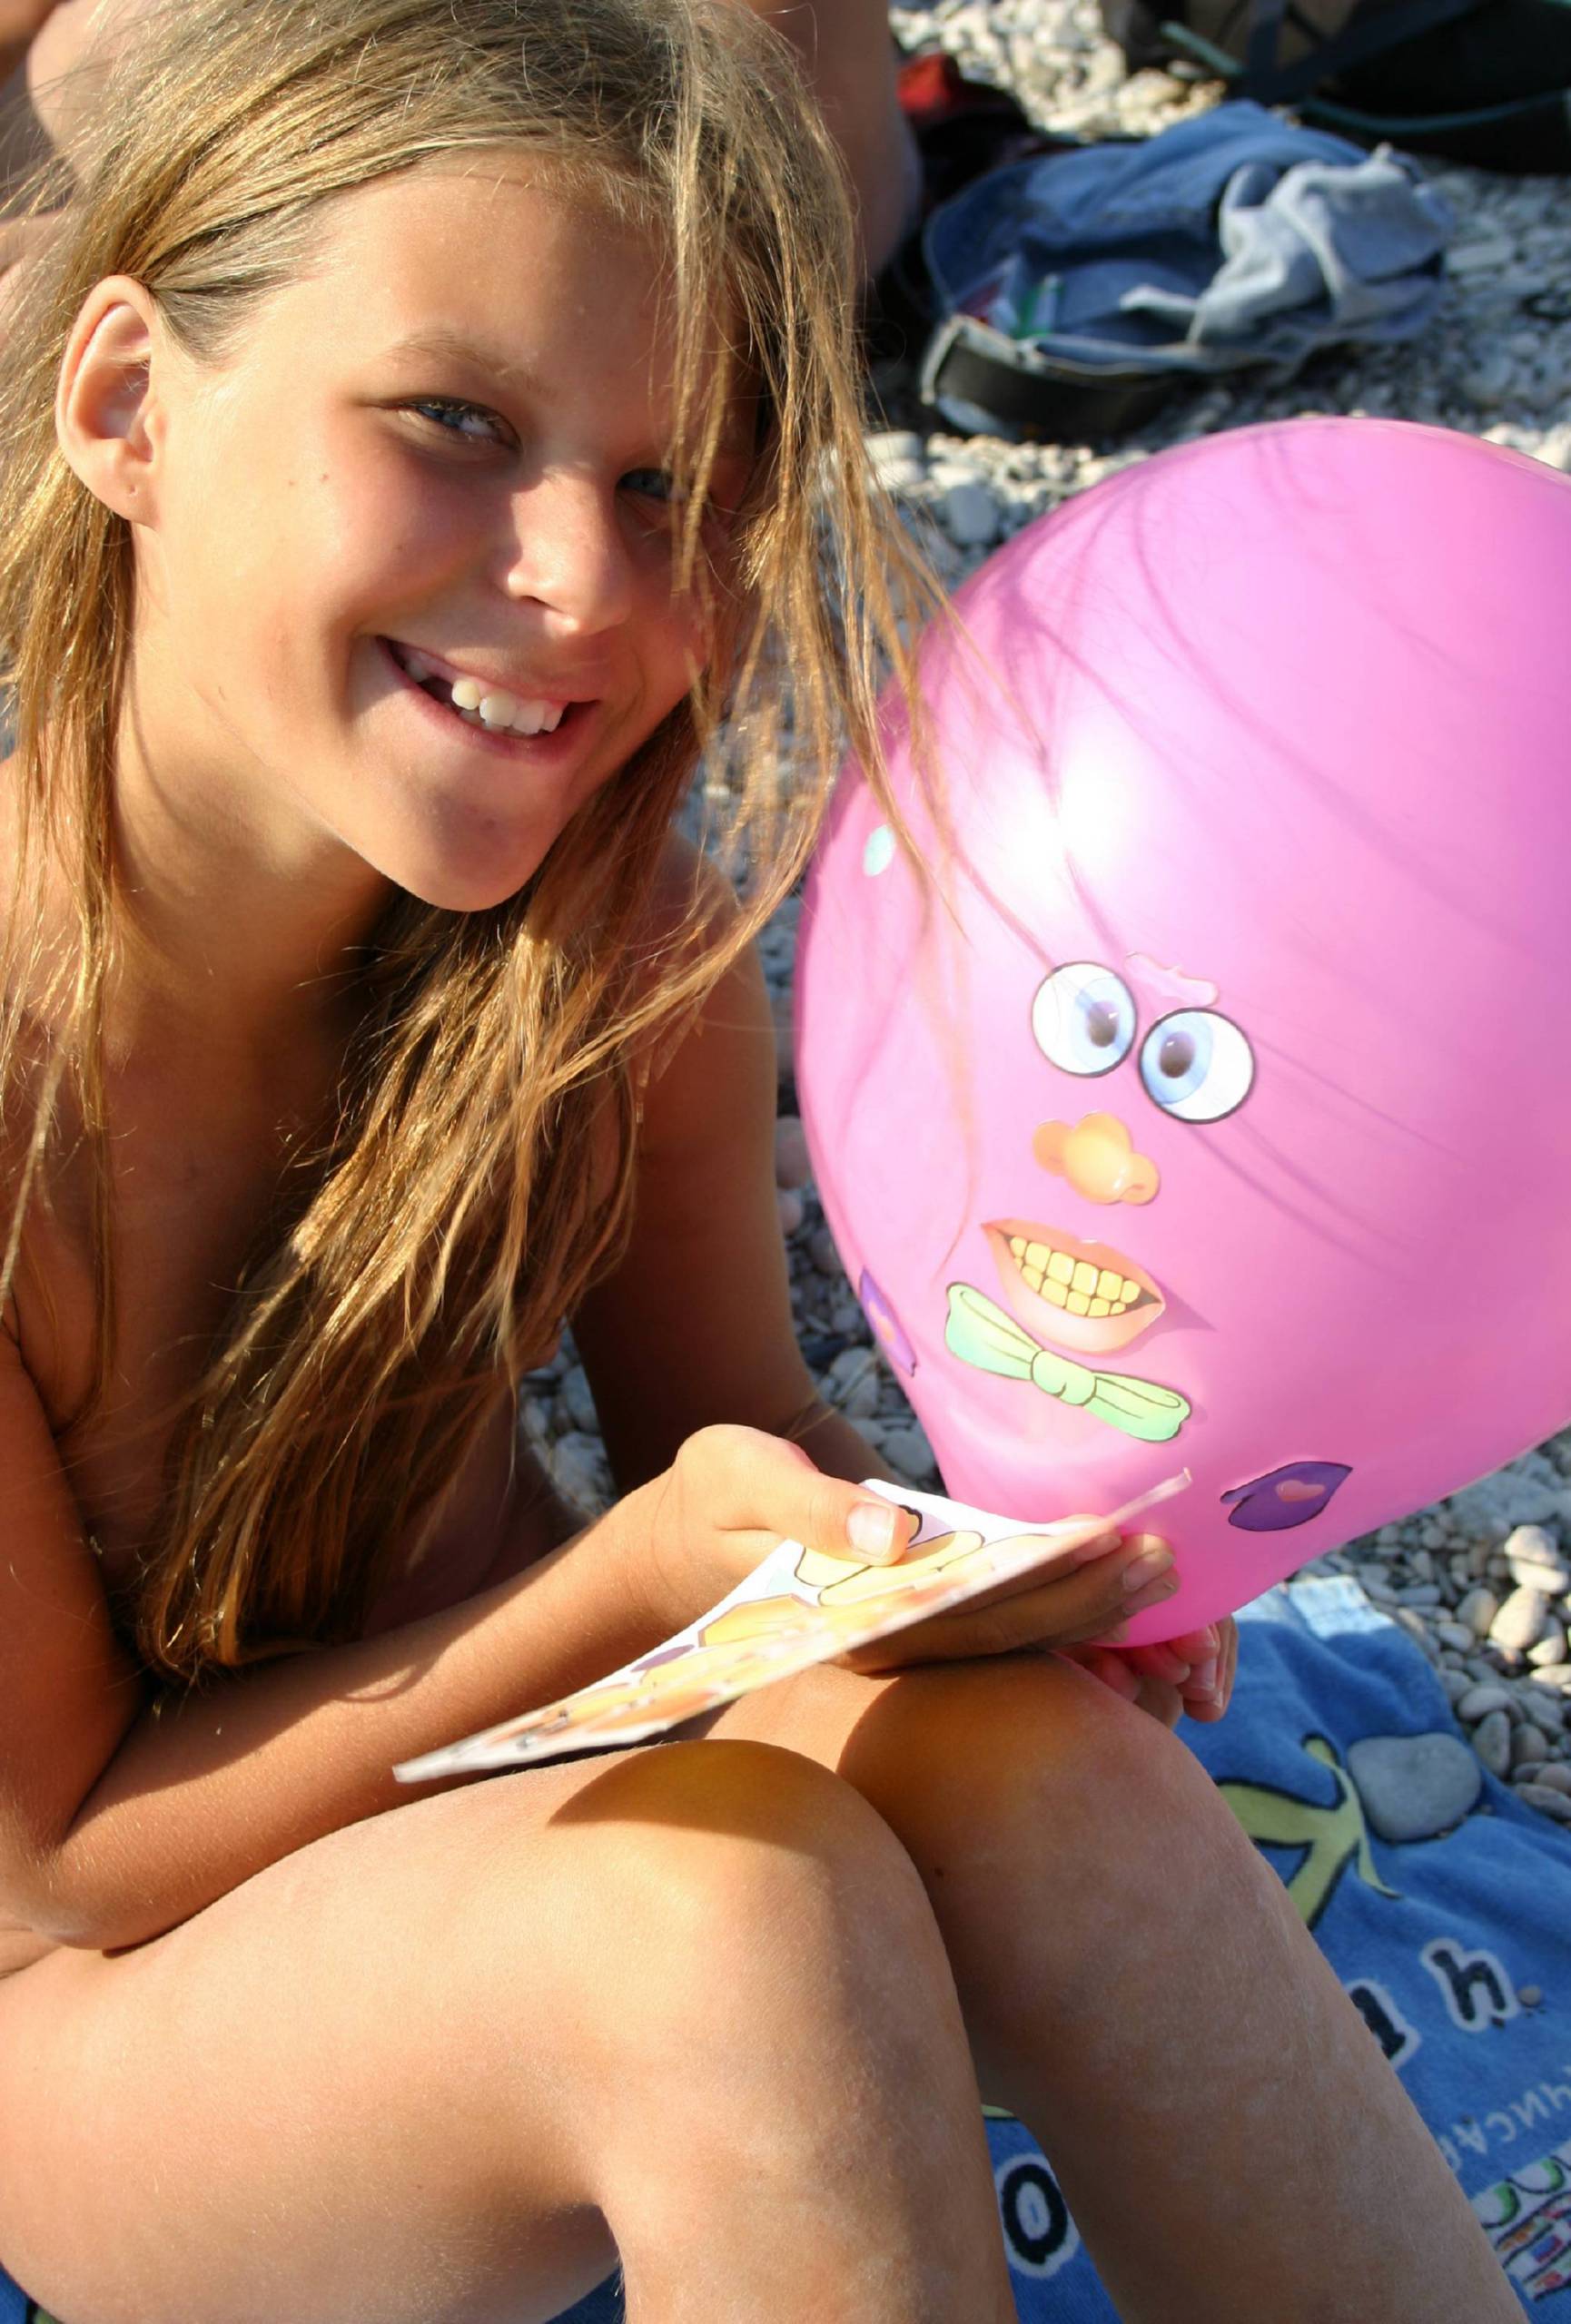 Our Beach Balloon Profile Pure Nudism Family - 1